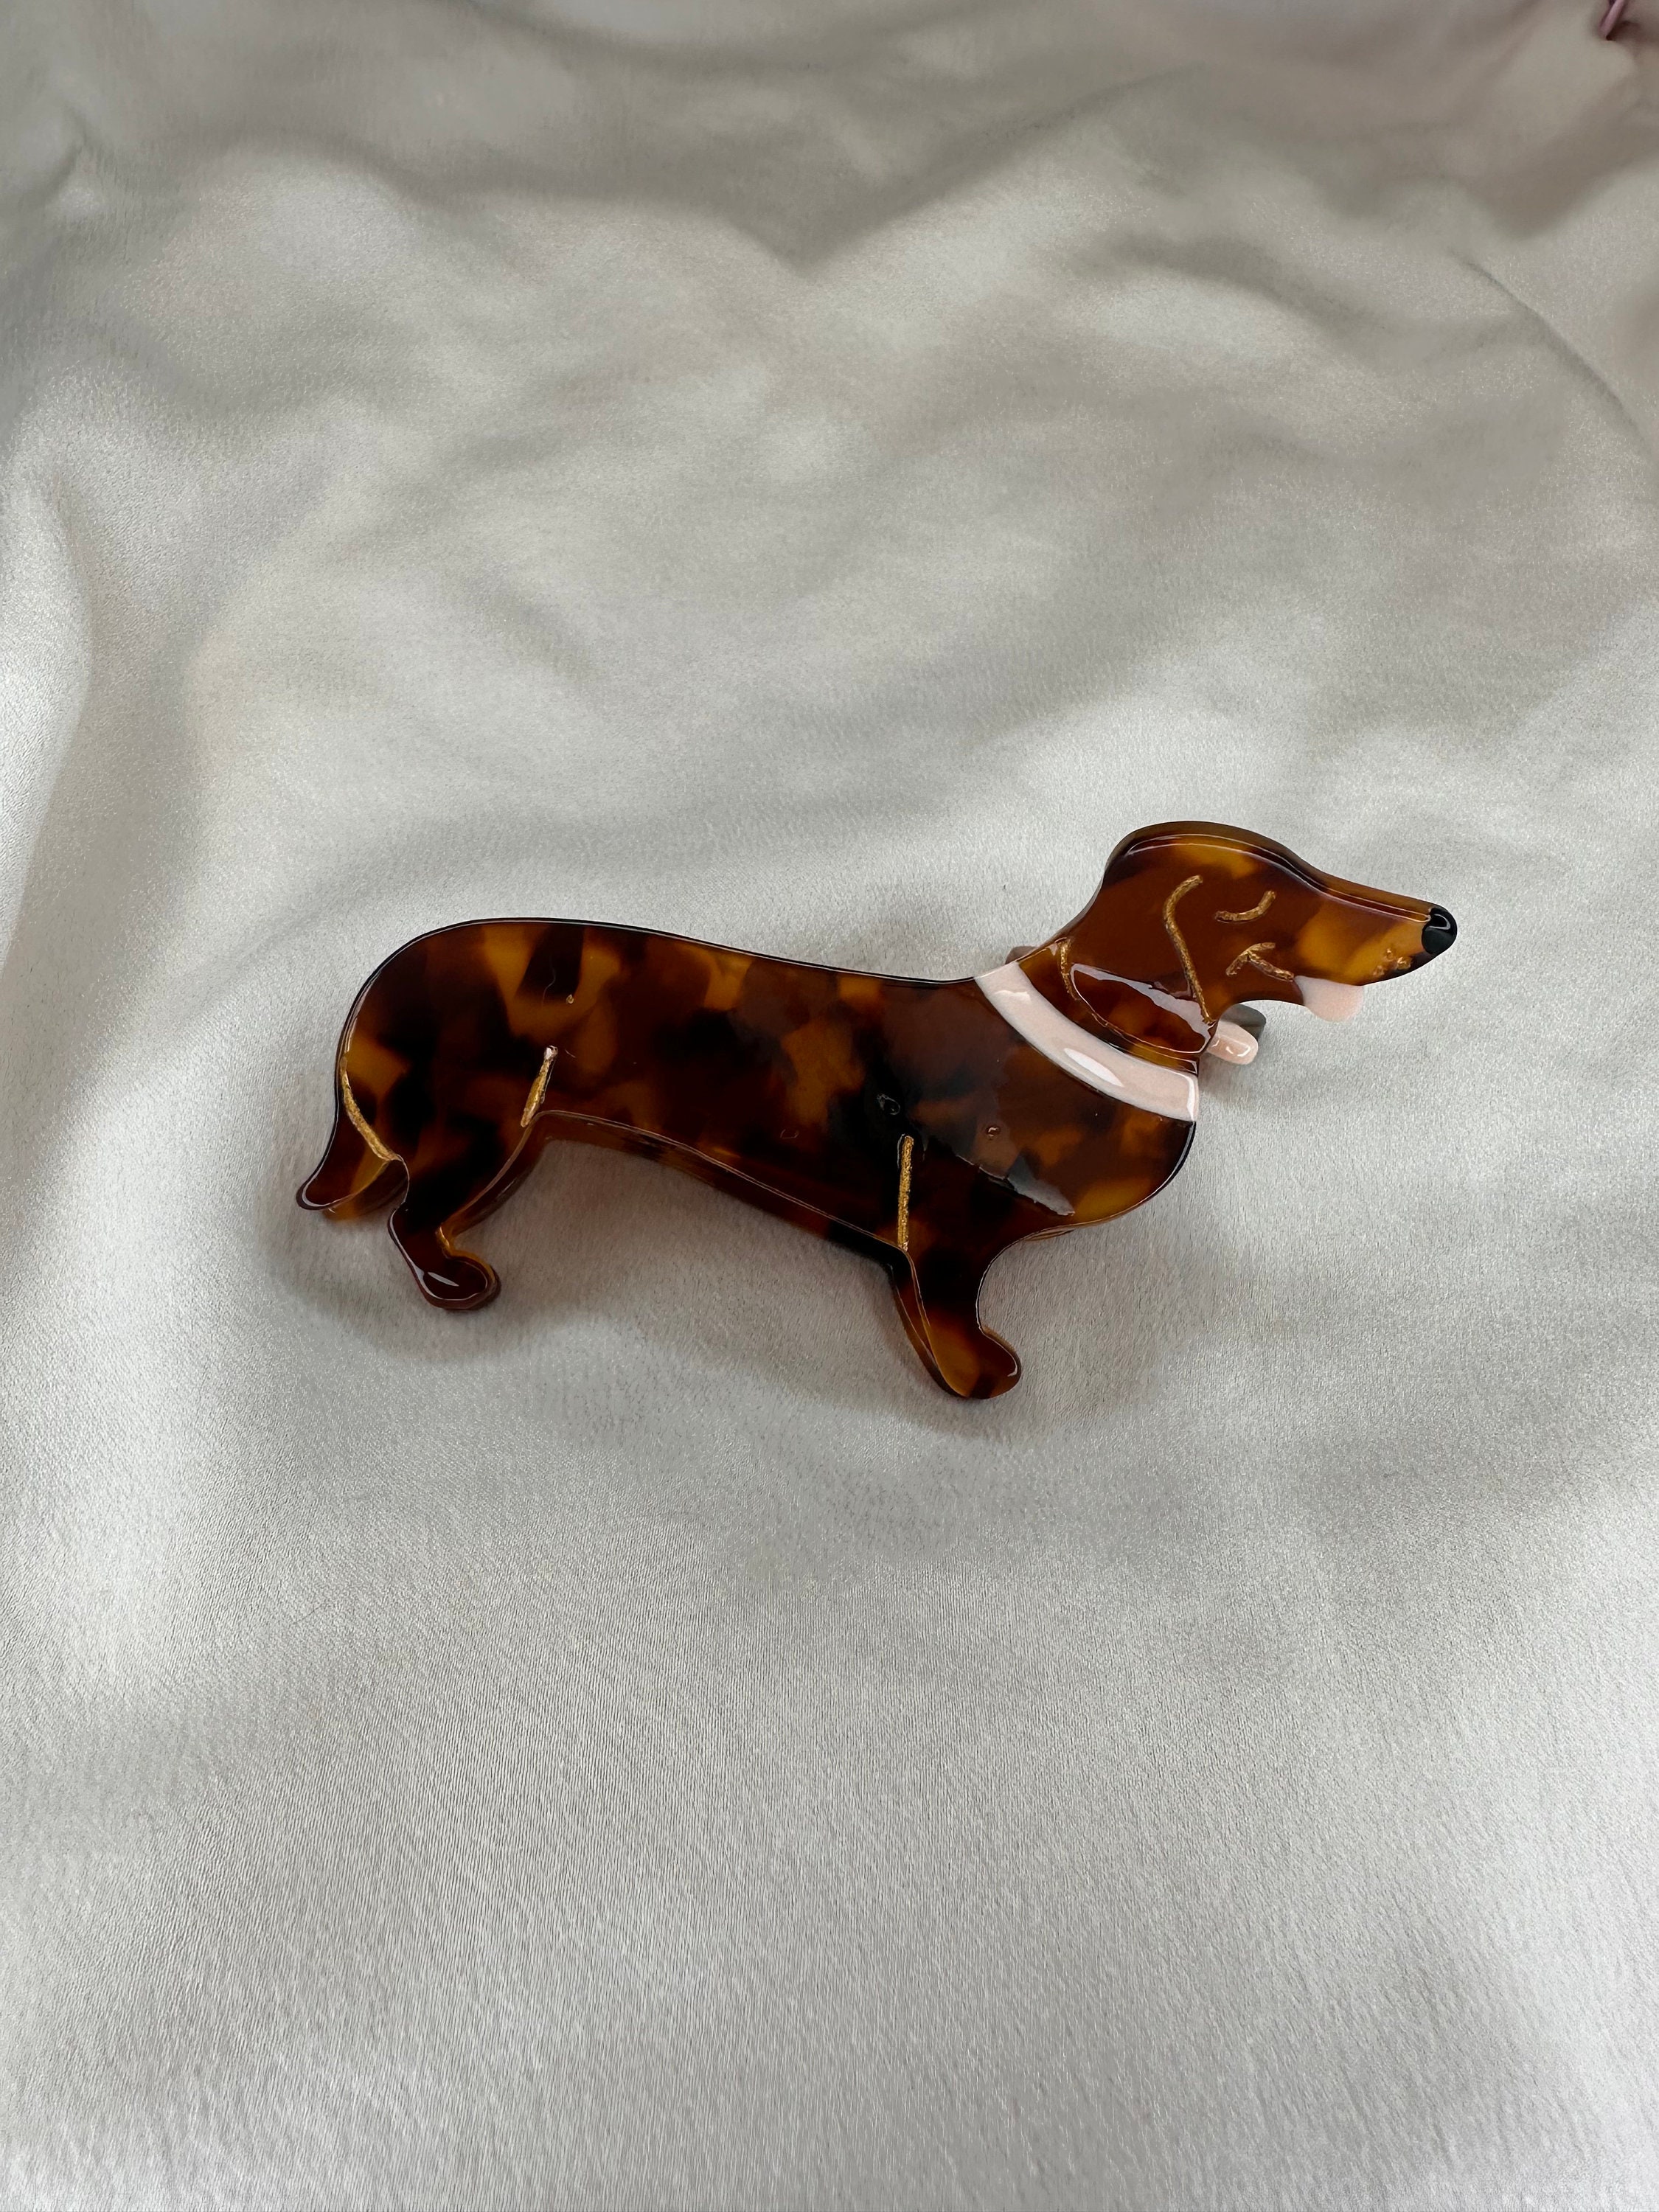 Dachshund Claw Clip, Dachshund Dog Hair Clips, Accessories for Dog Lovers,  Dog Lovers Gift, Dog Mom Gift, Wiener Dog Clip, Dachshund Gift 